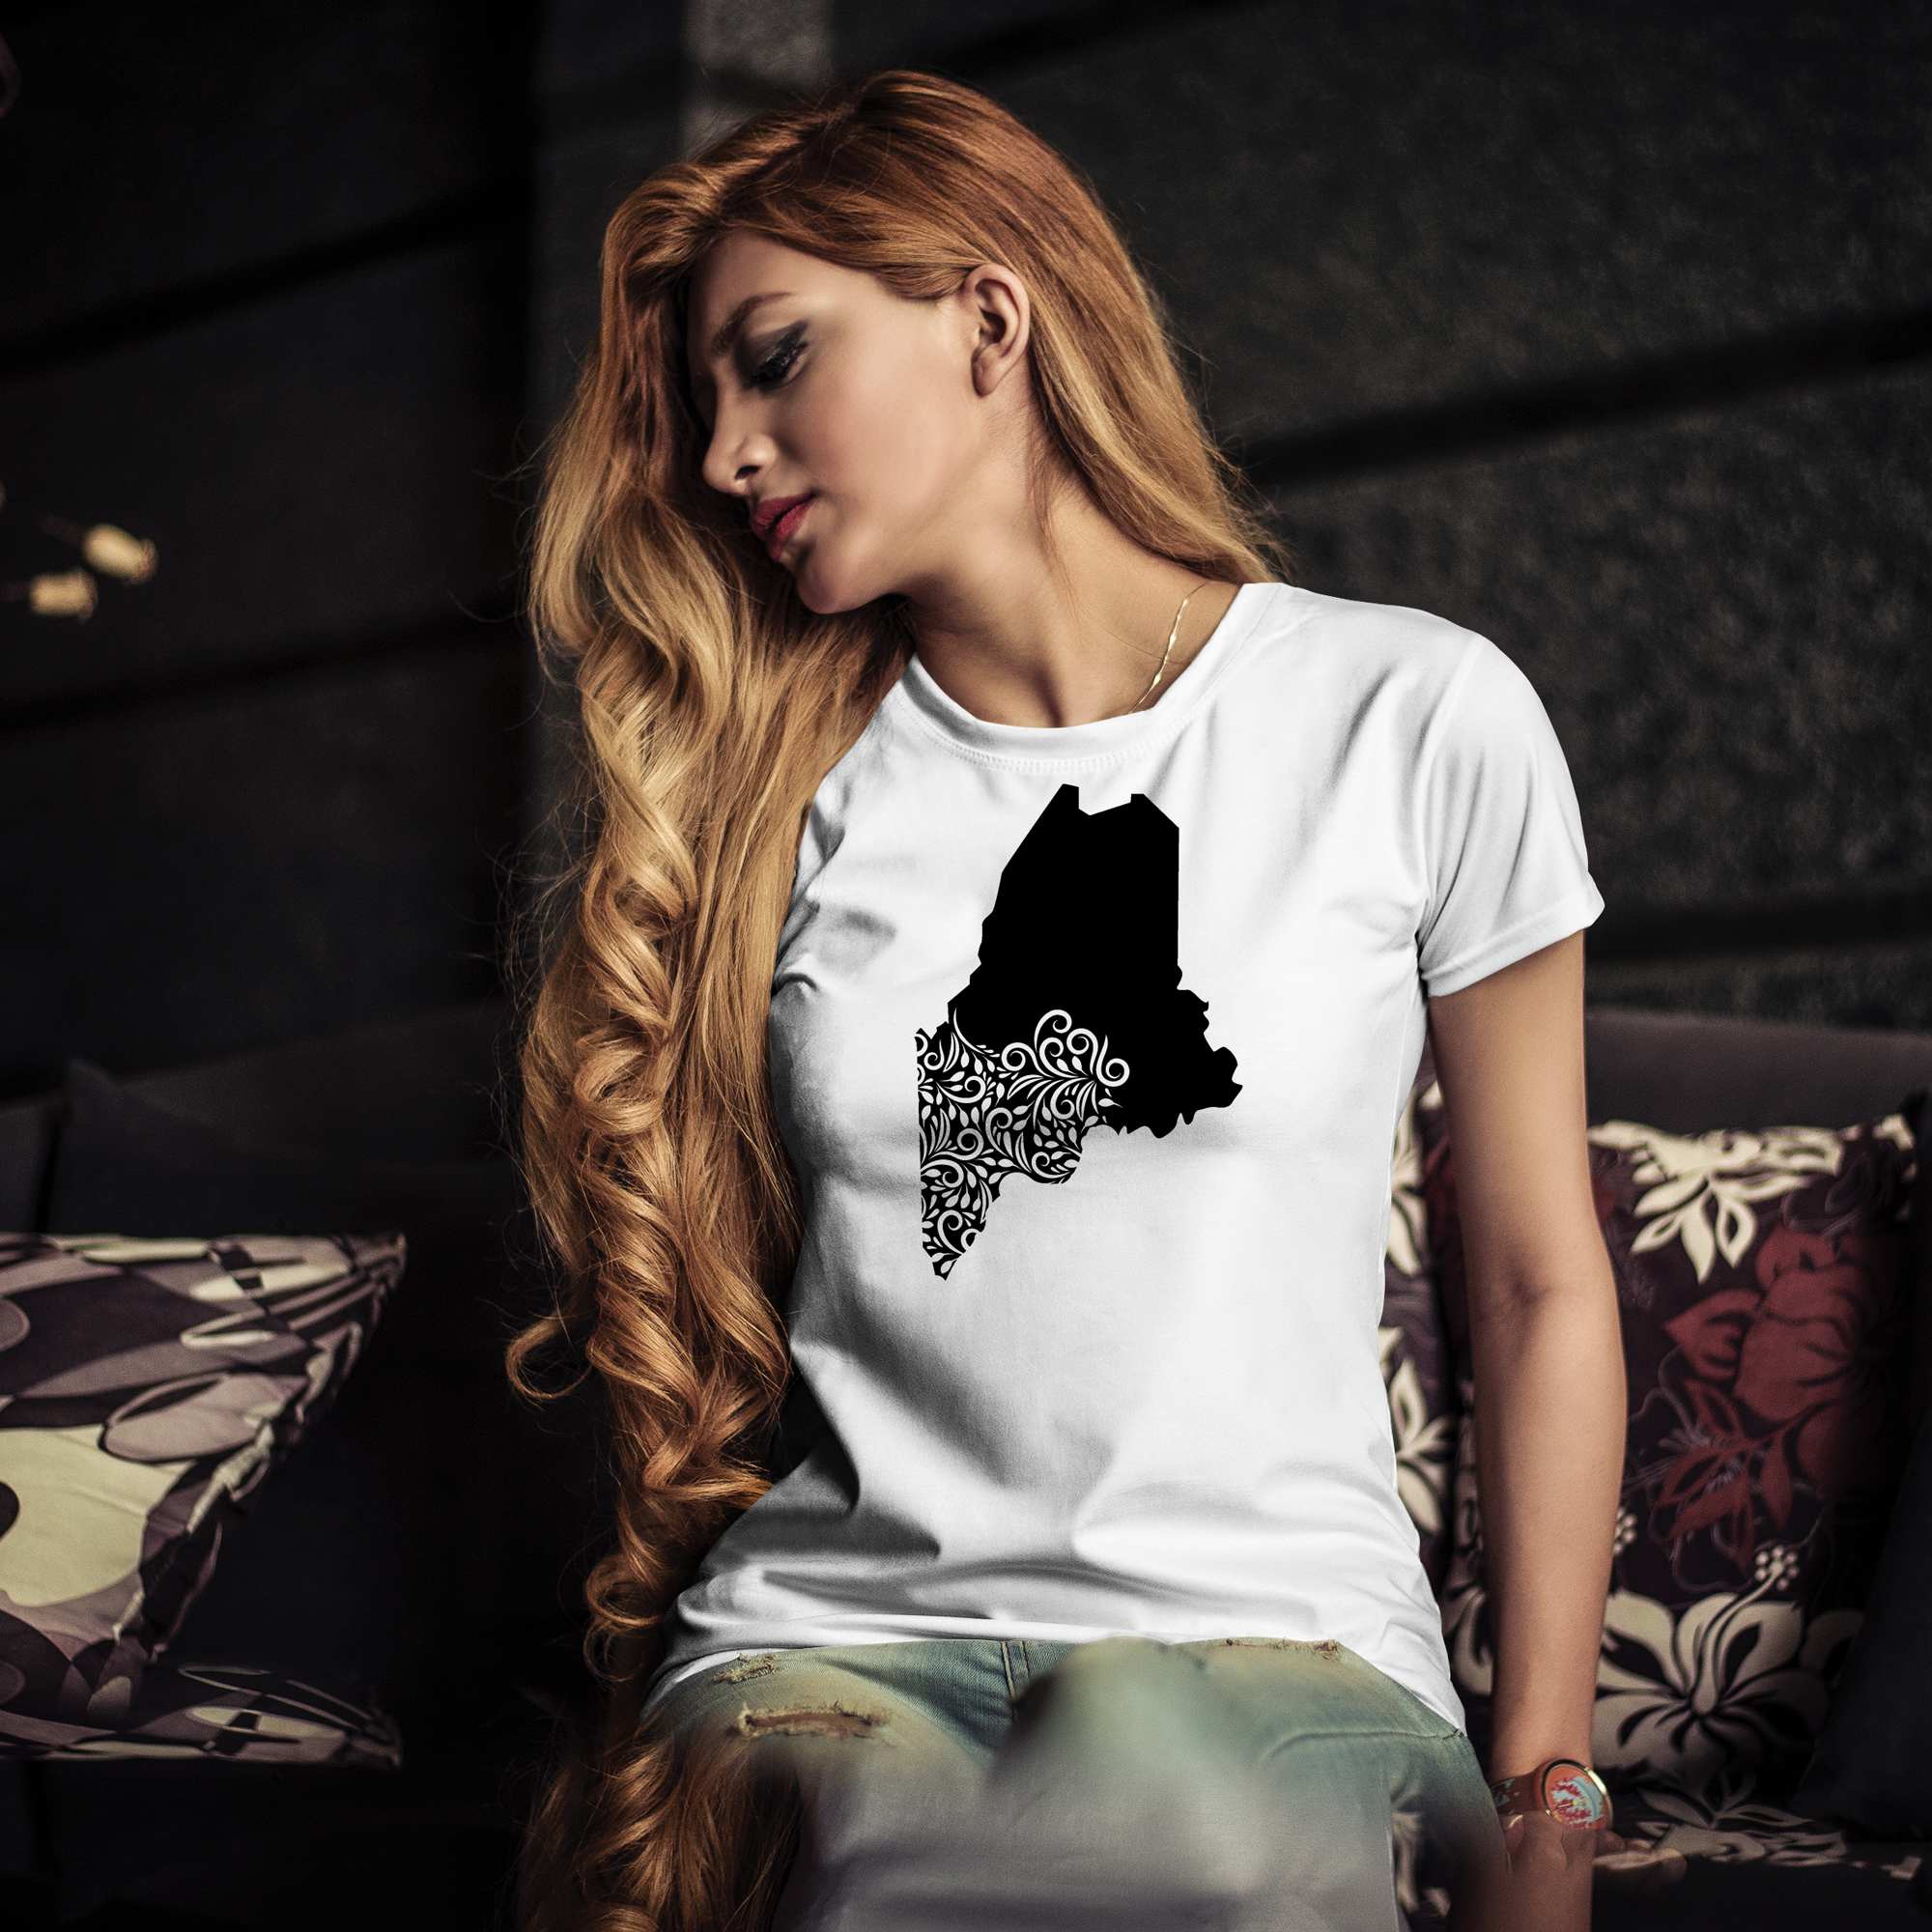 White t-shirt with black illustration of Maine state.